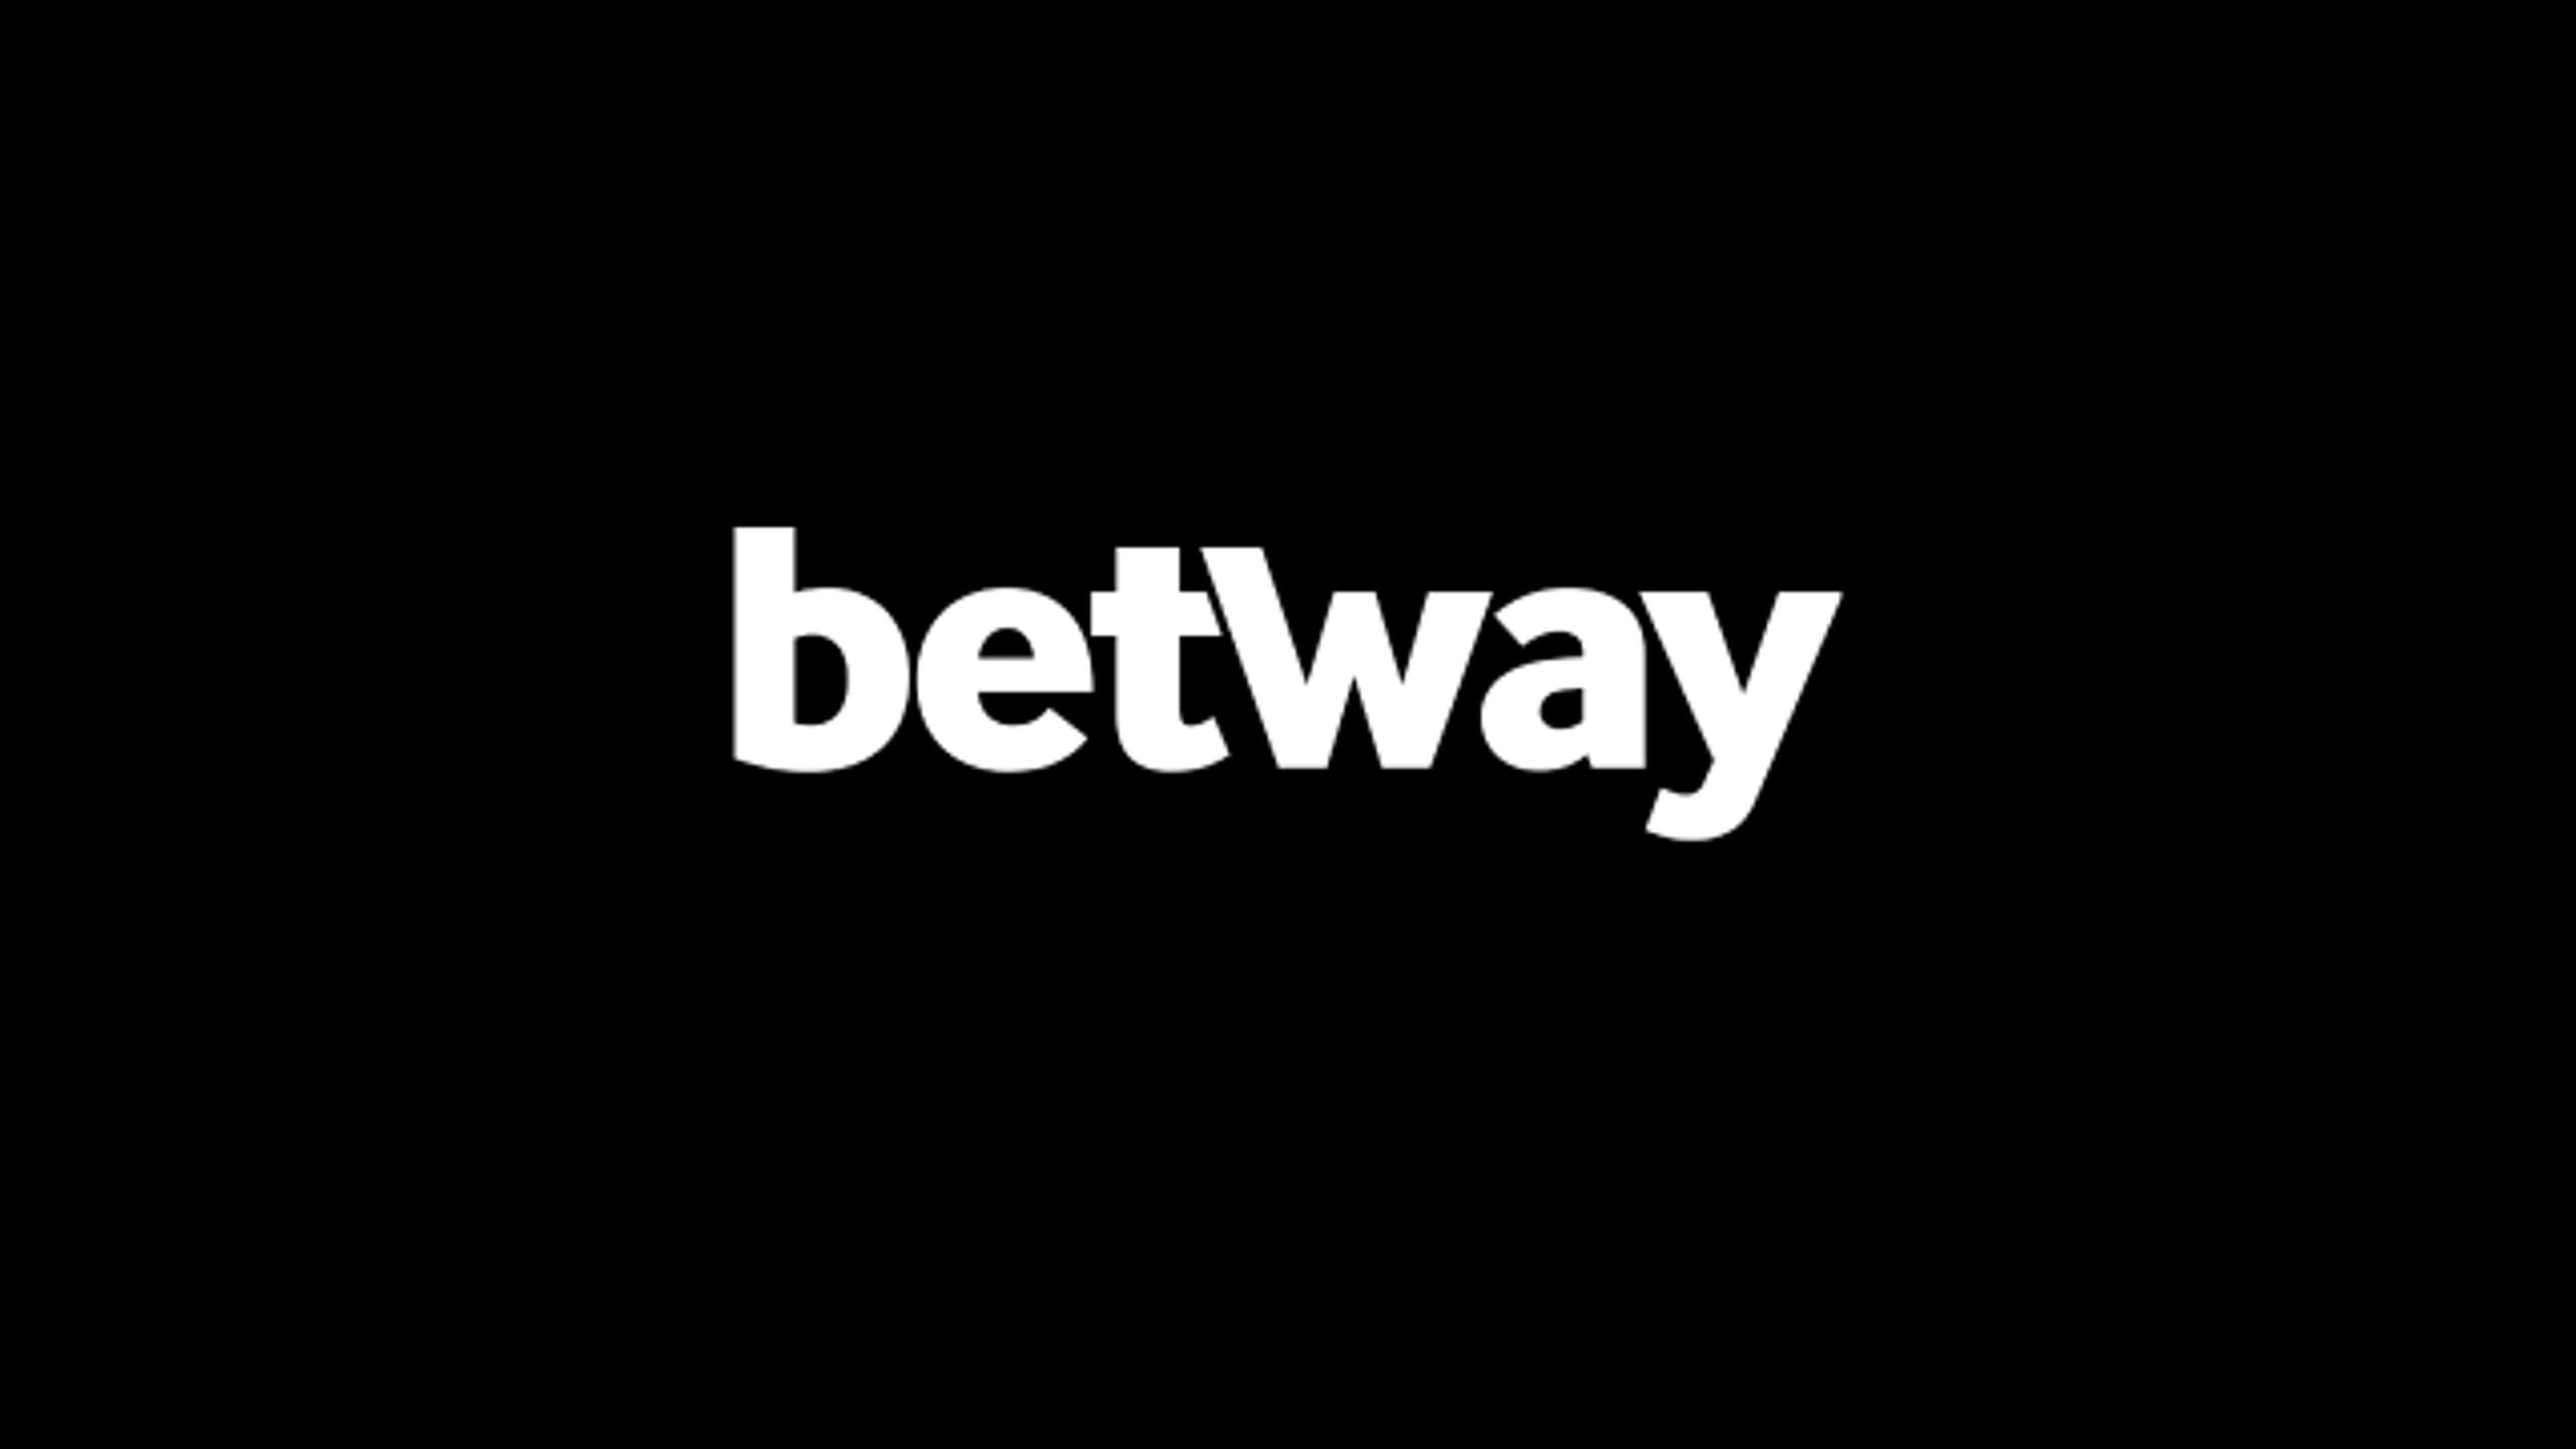 bet soccer and more for Android - Free App Download